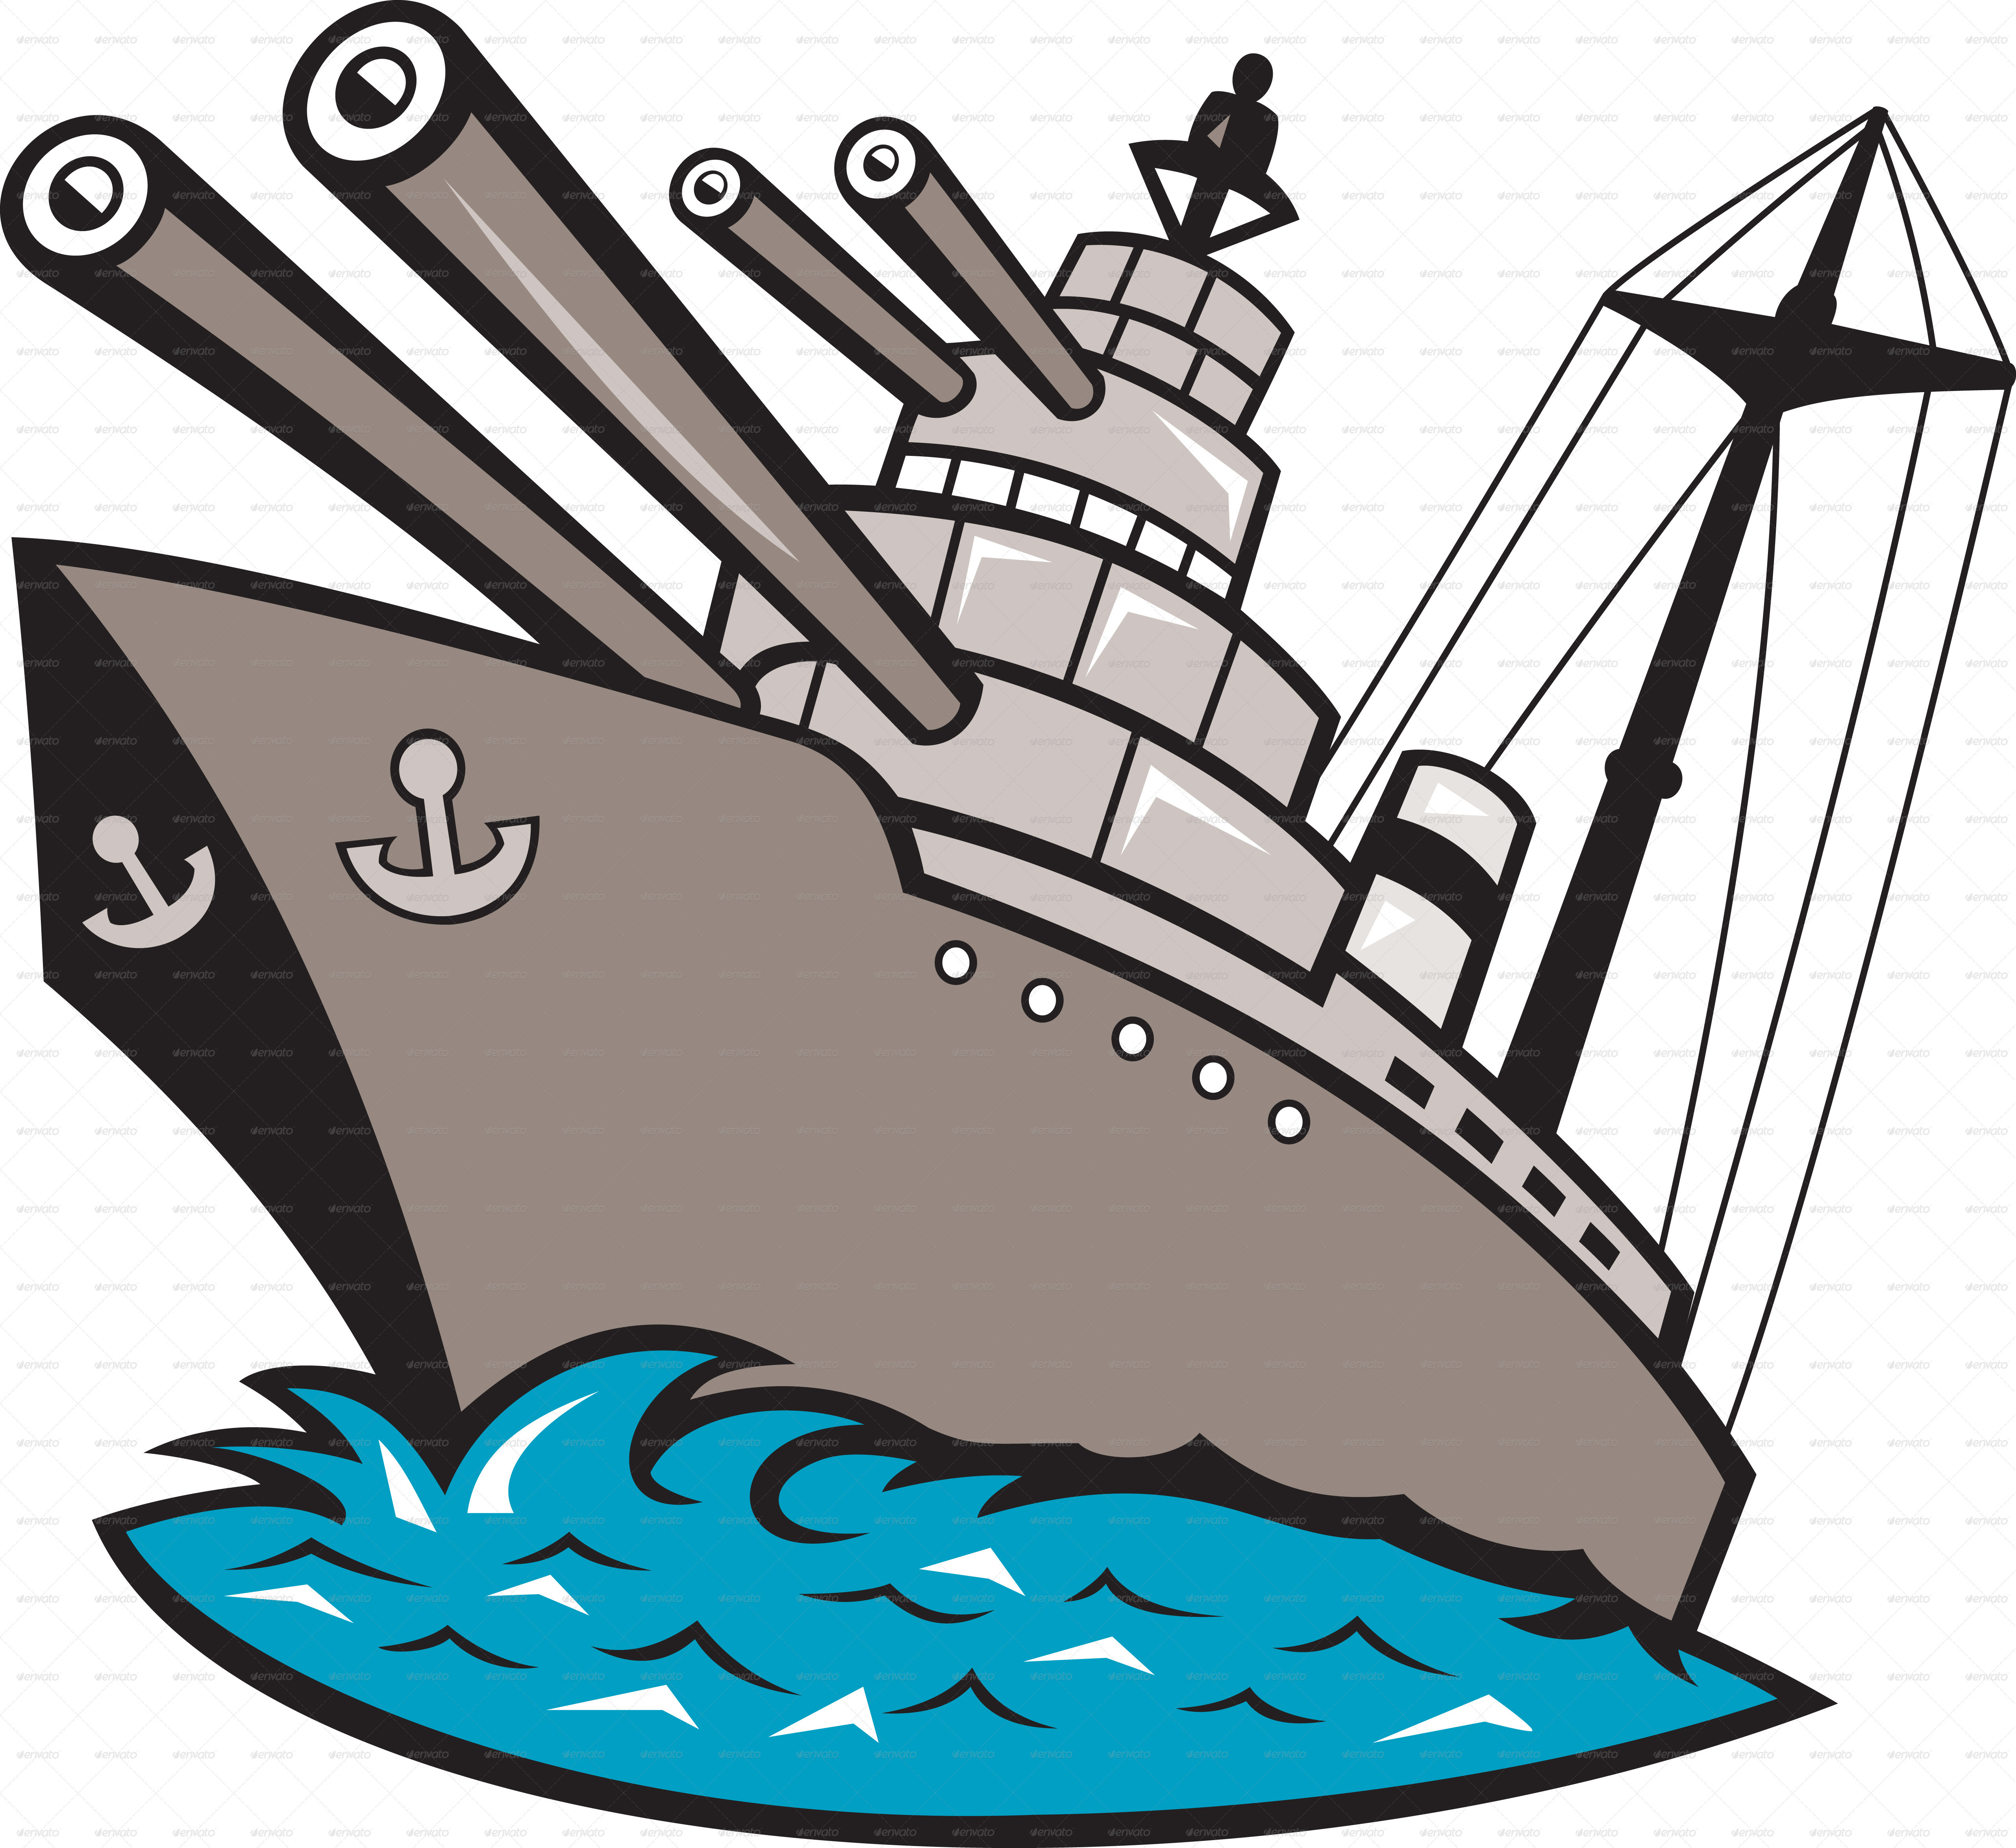     Boat Ship With Big Guns Viewed From A Low Angle Cartoon Style